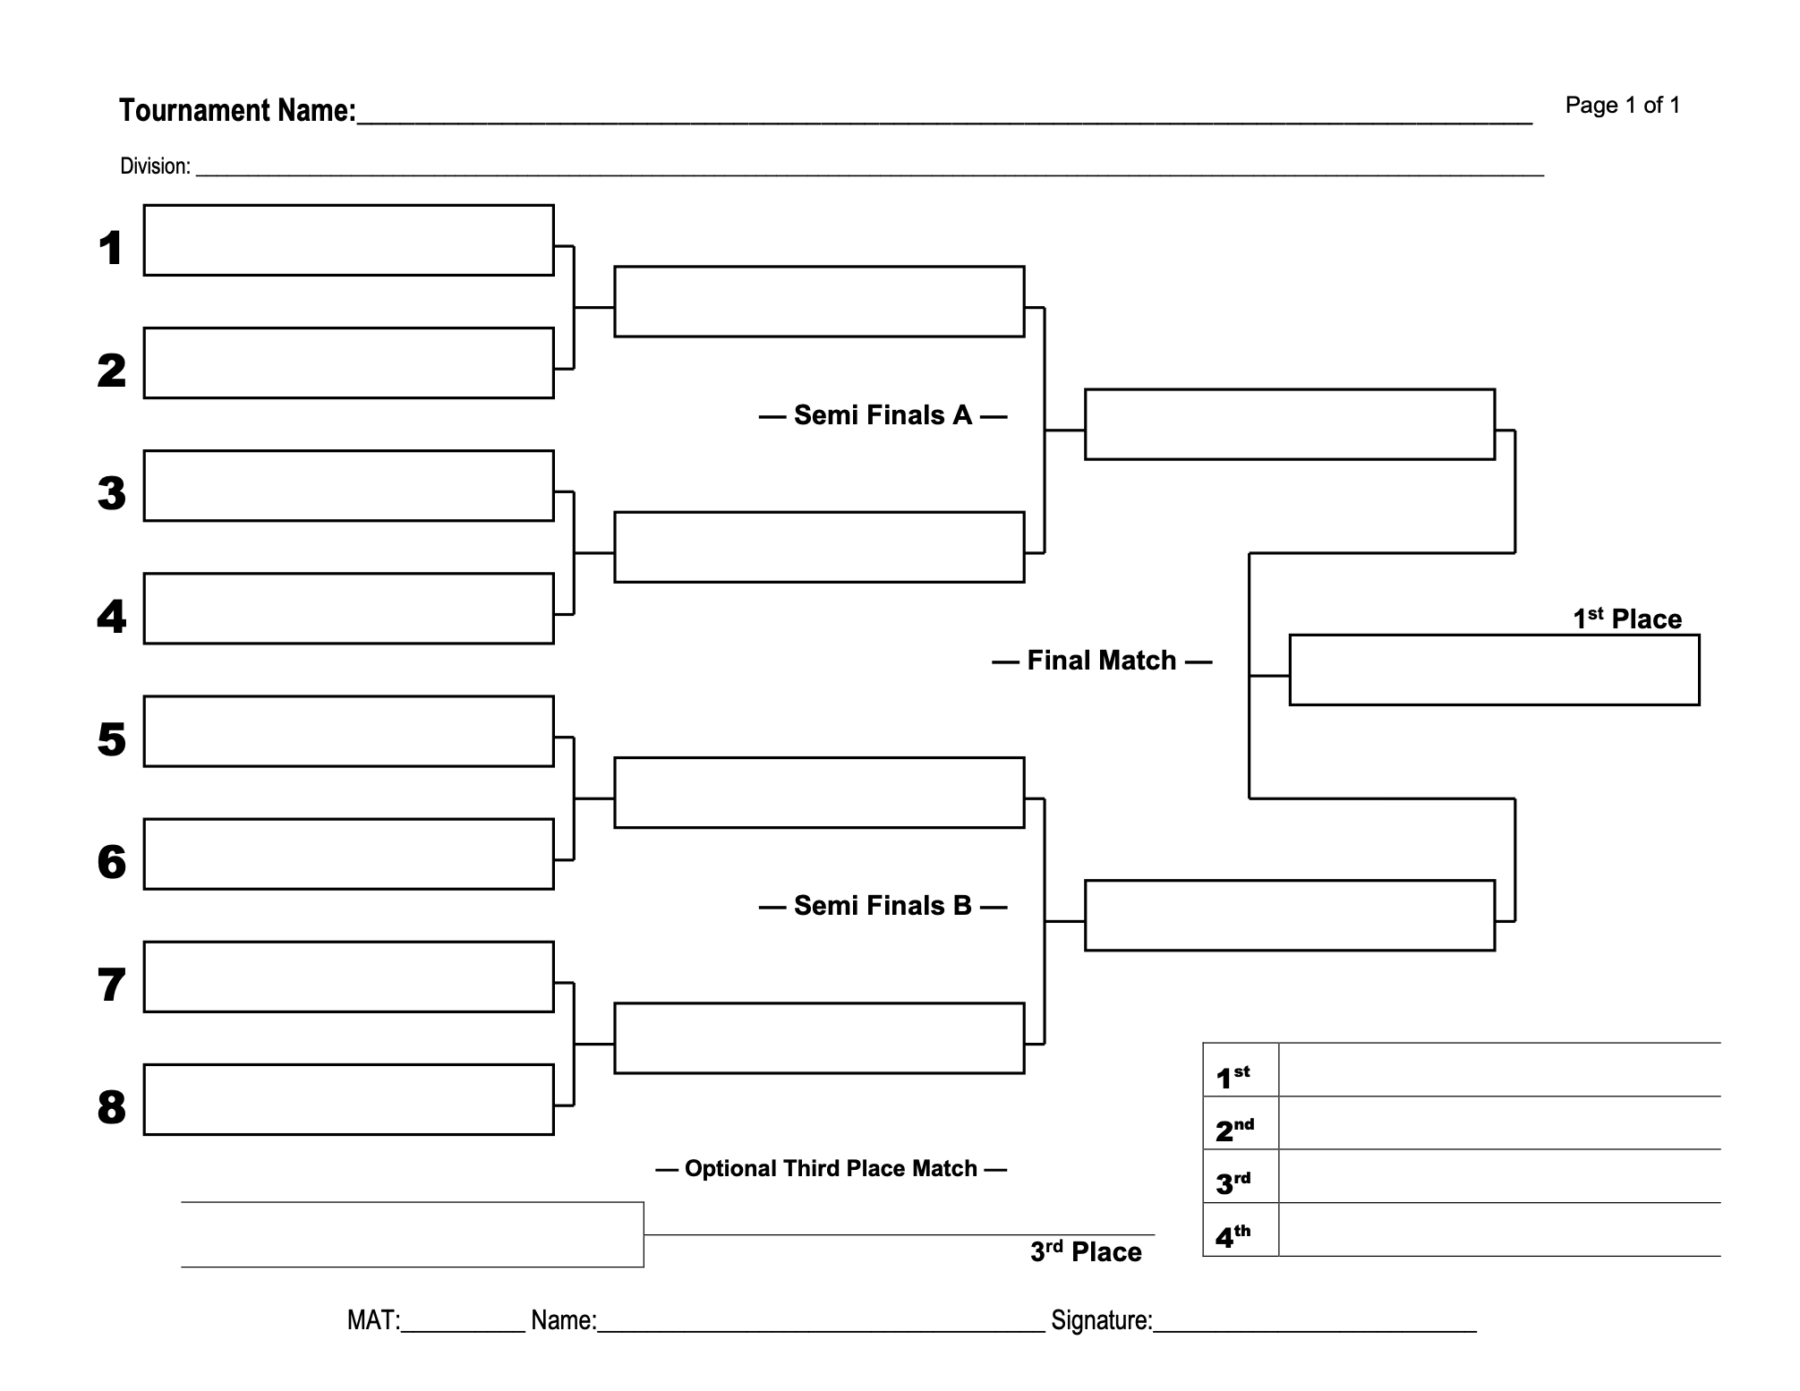 Tournament-Brackets-Template-for-word-04-22-06